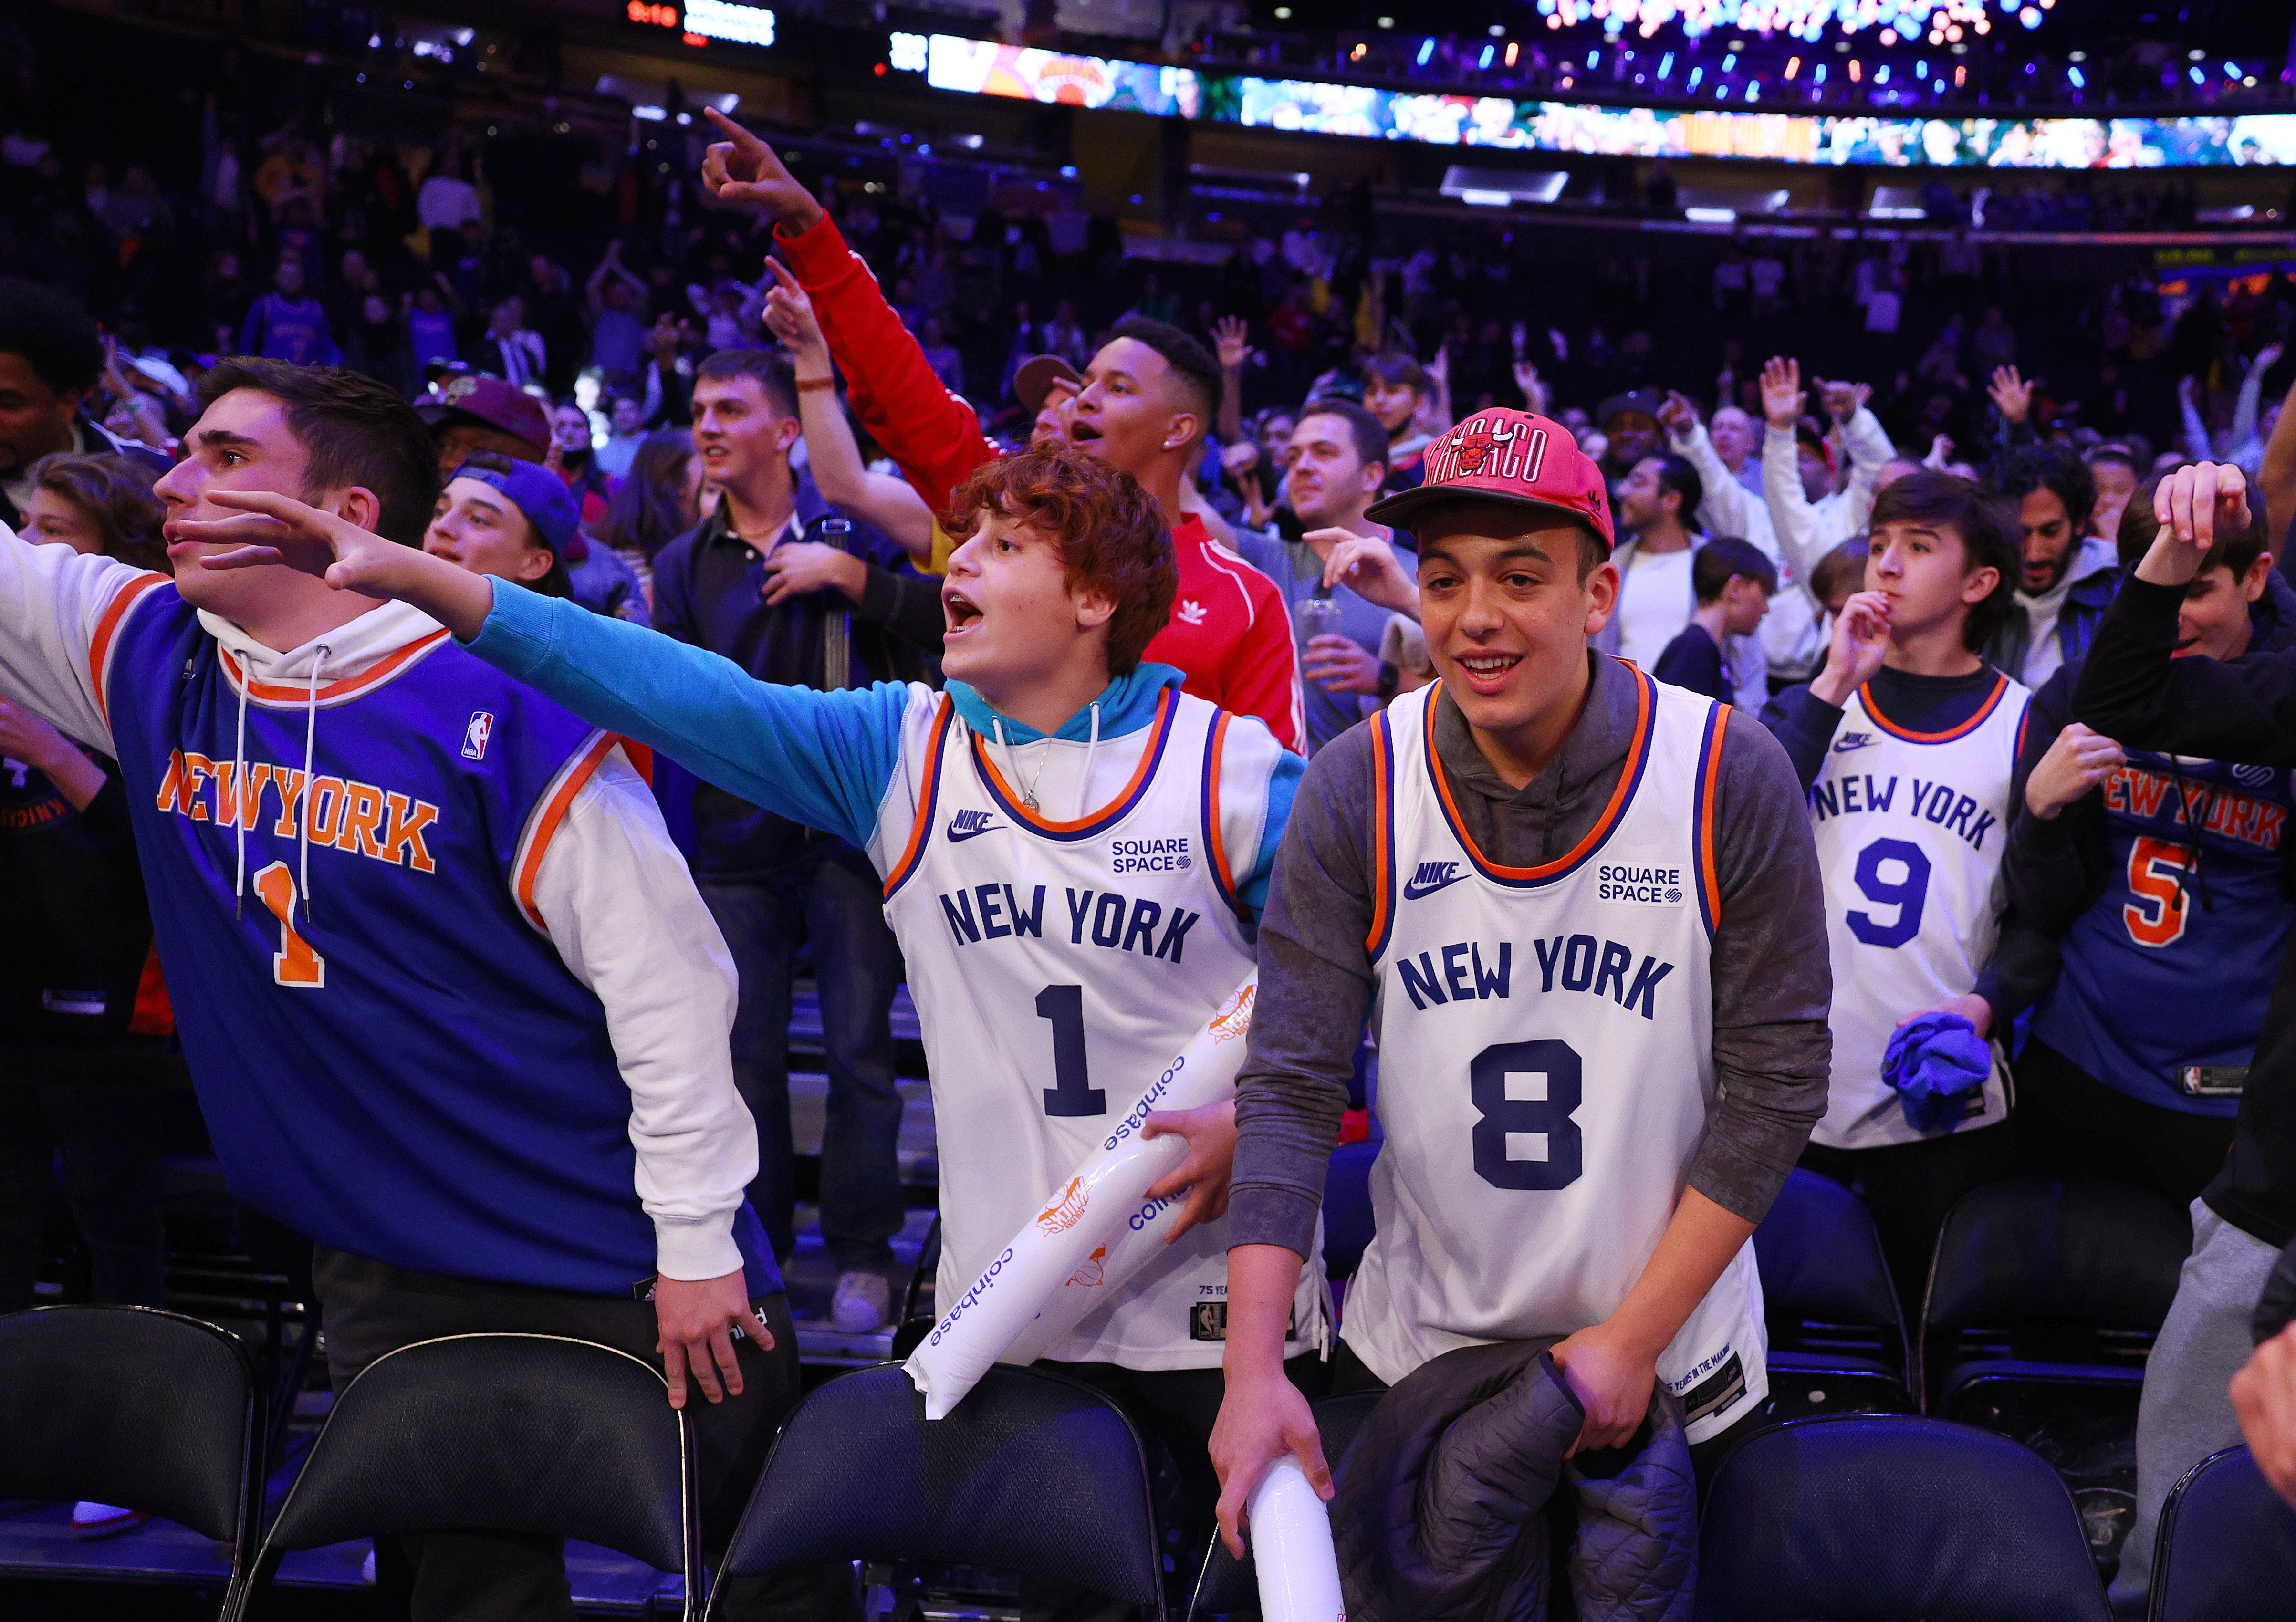 Fans cheer on the Knicks at Madison Square Garden.